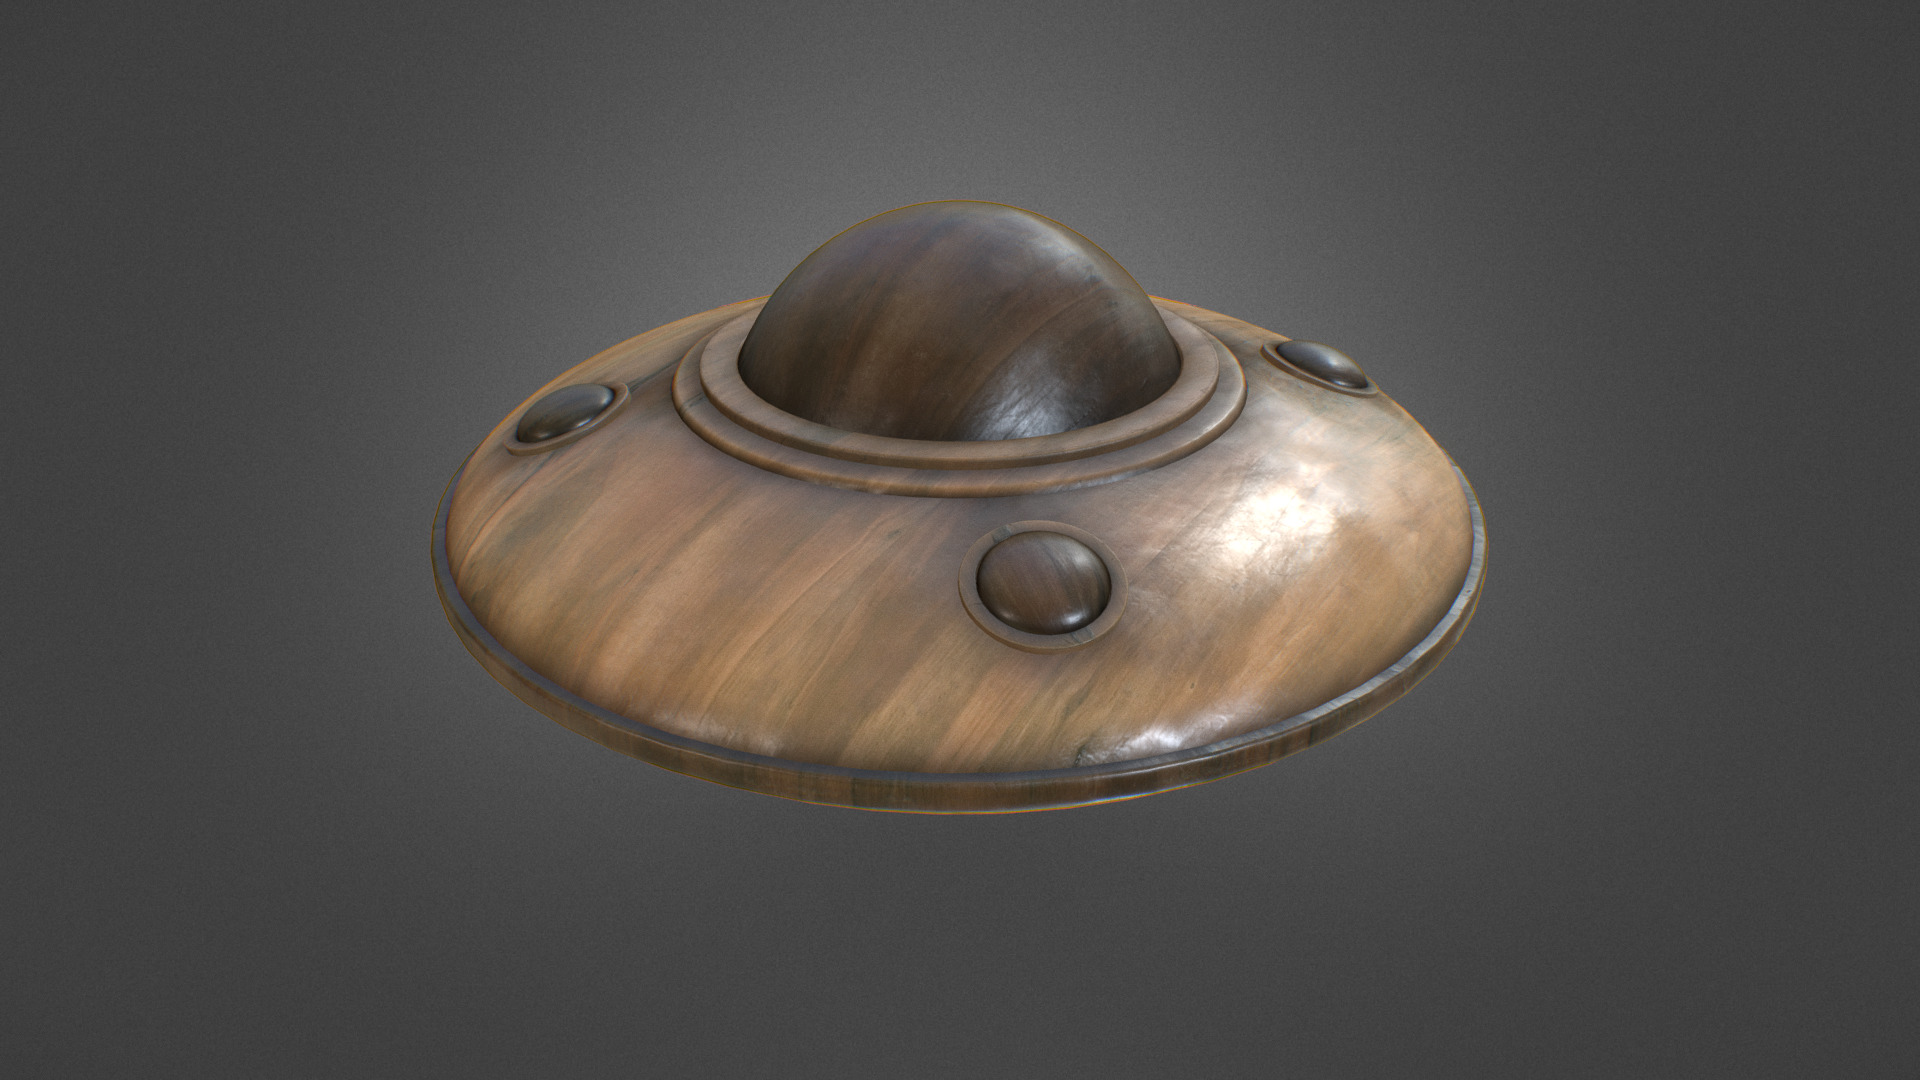 3D model Wooden UFO Toy - This is a 3D model of the Wooden UFO Toy. The 3D model is about a wooden object with a handle.